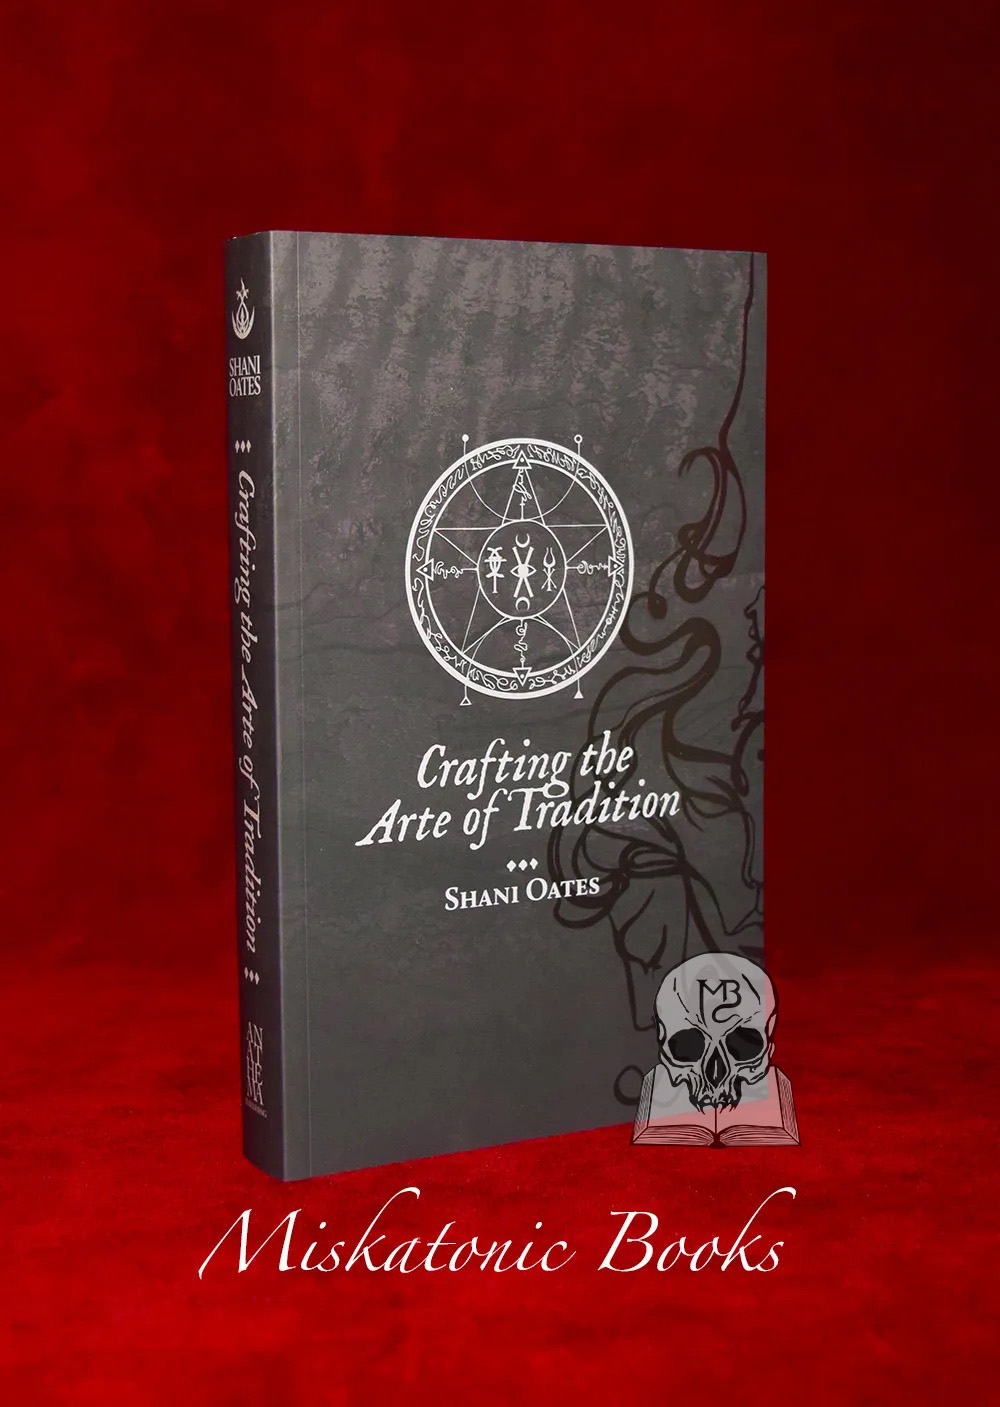 CRAFTING THE ARTE OF TRADITION by Shani Oates (Trade Paperback Edition)